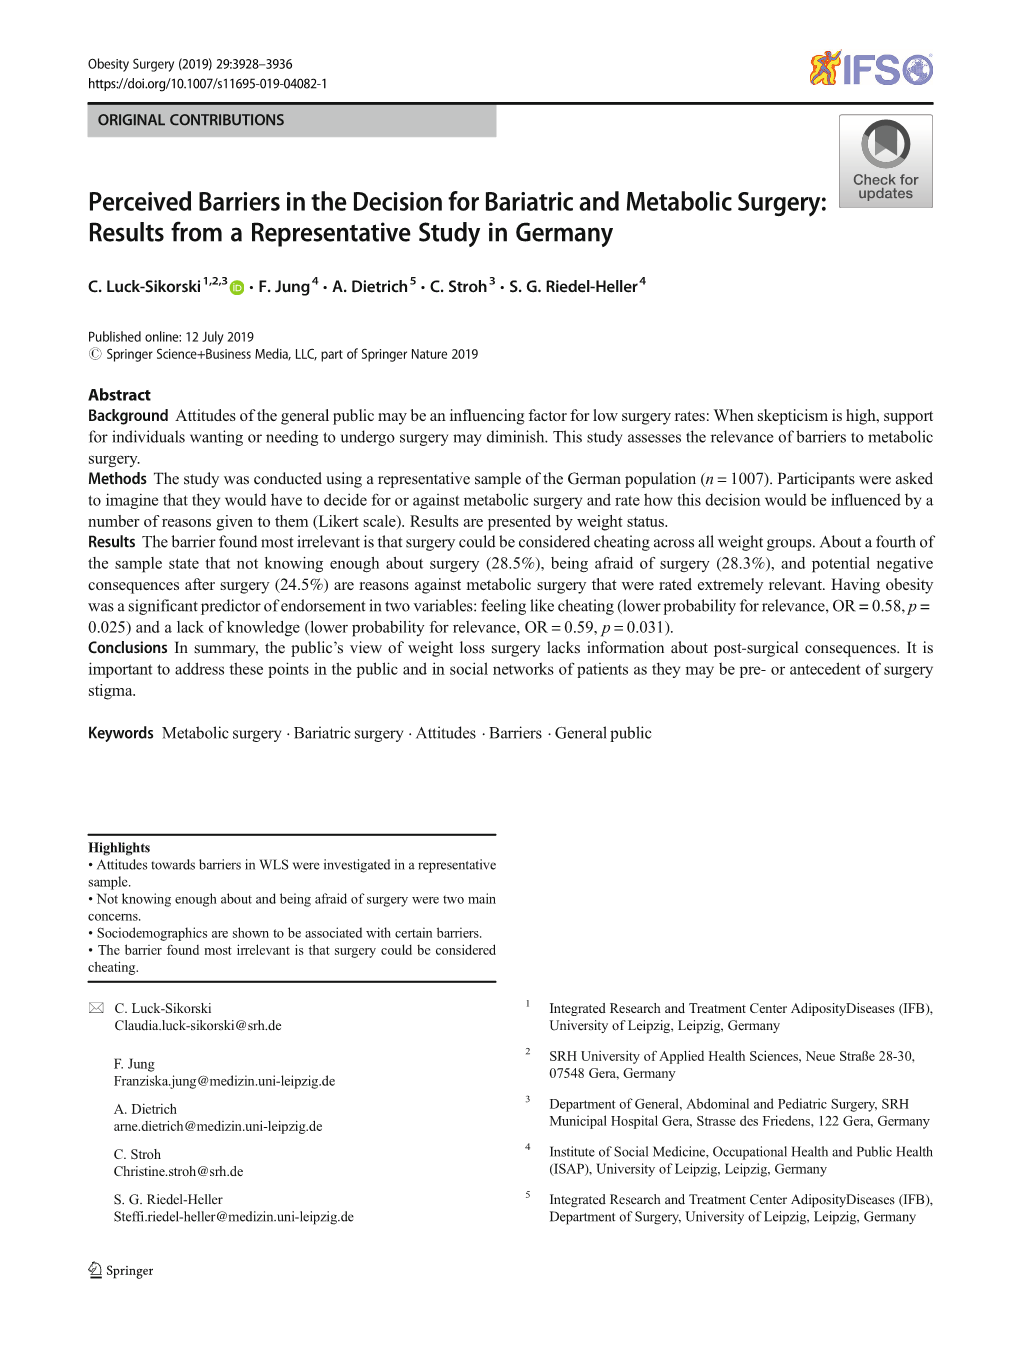 Perceived Barriers in the Decision for Bariatric and Metabolic Surgery: Results from a Representative Study in Germany